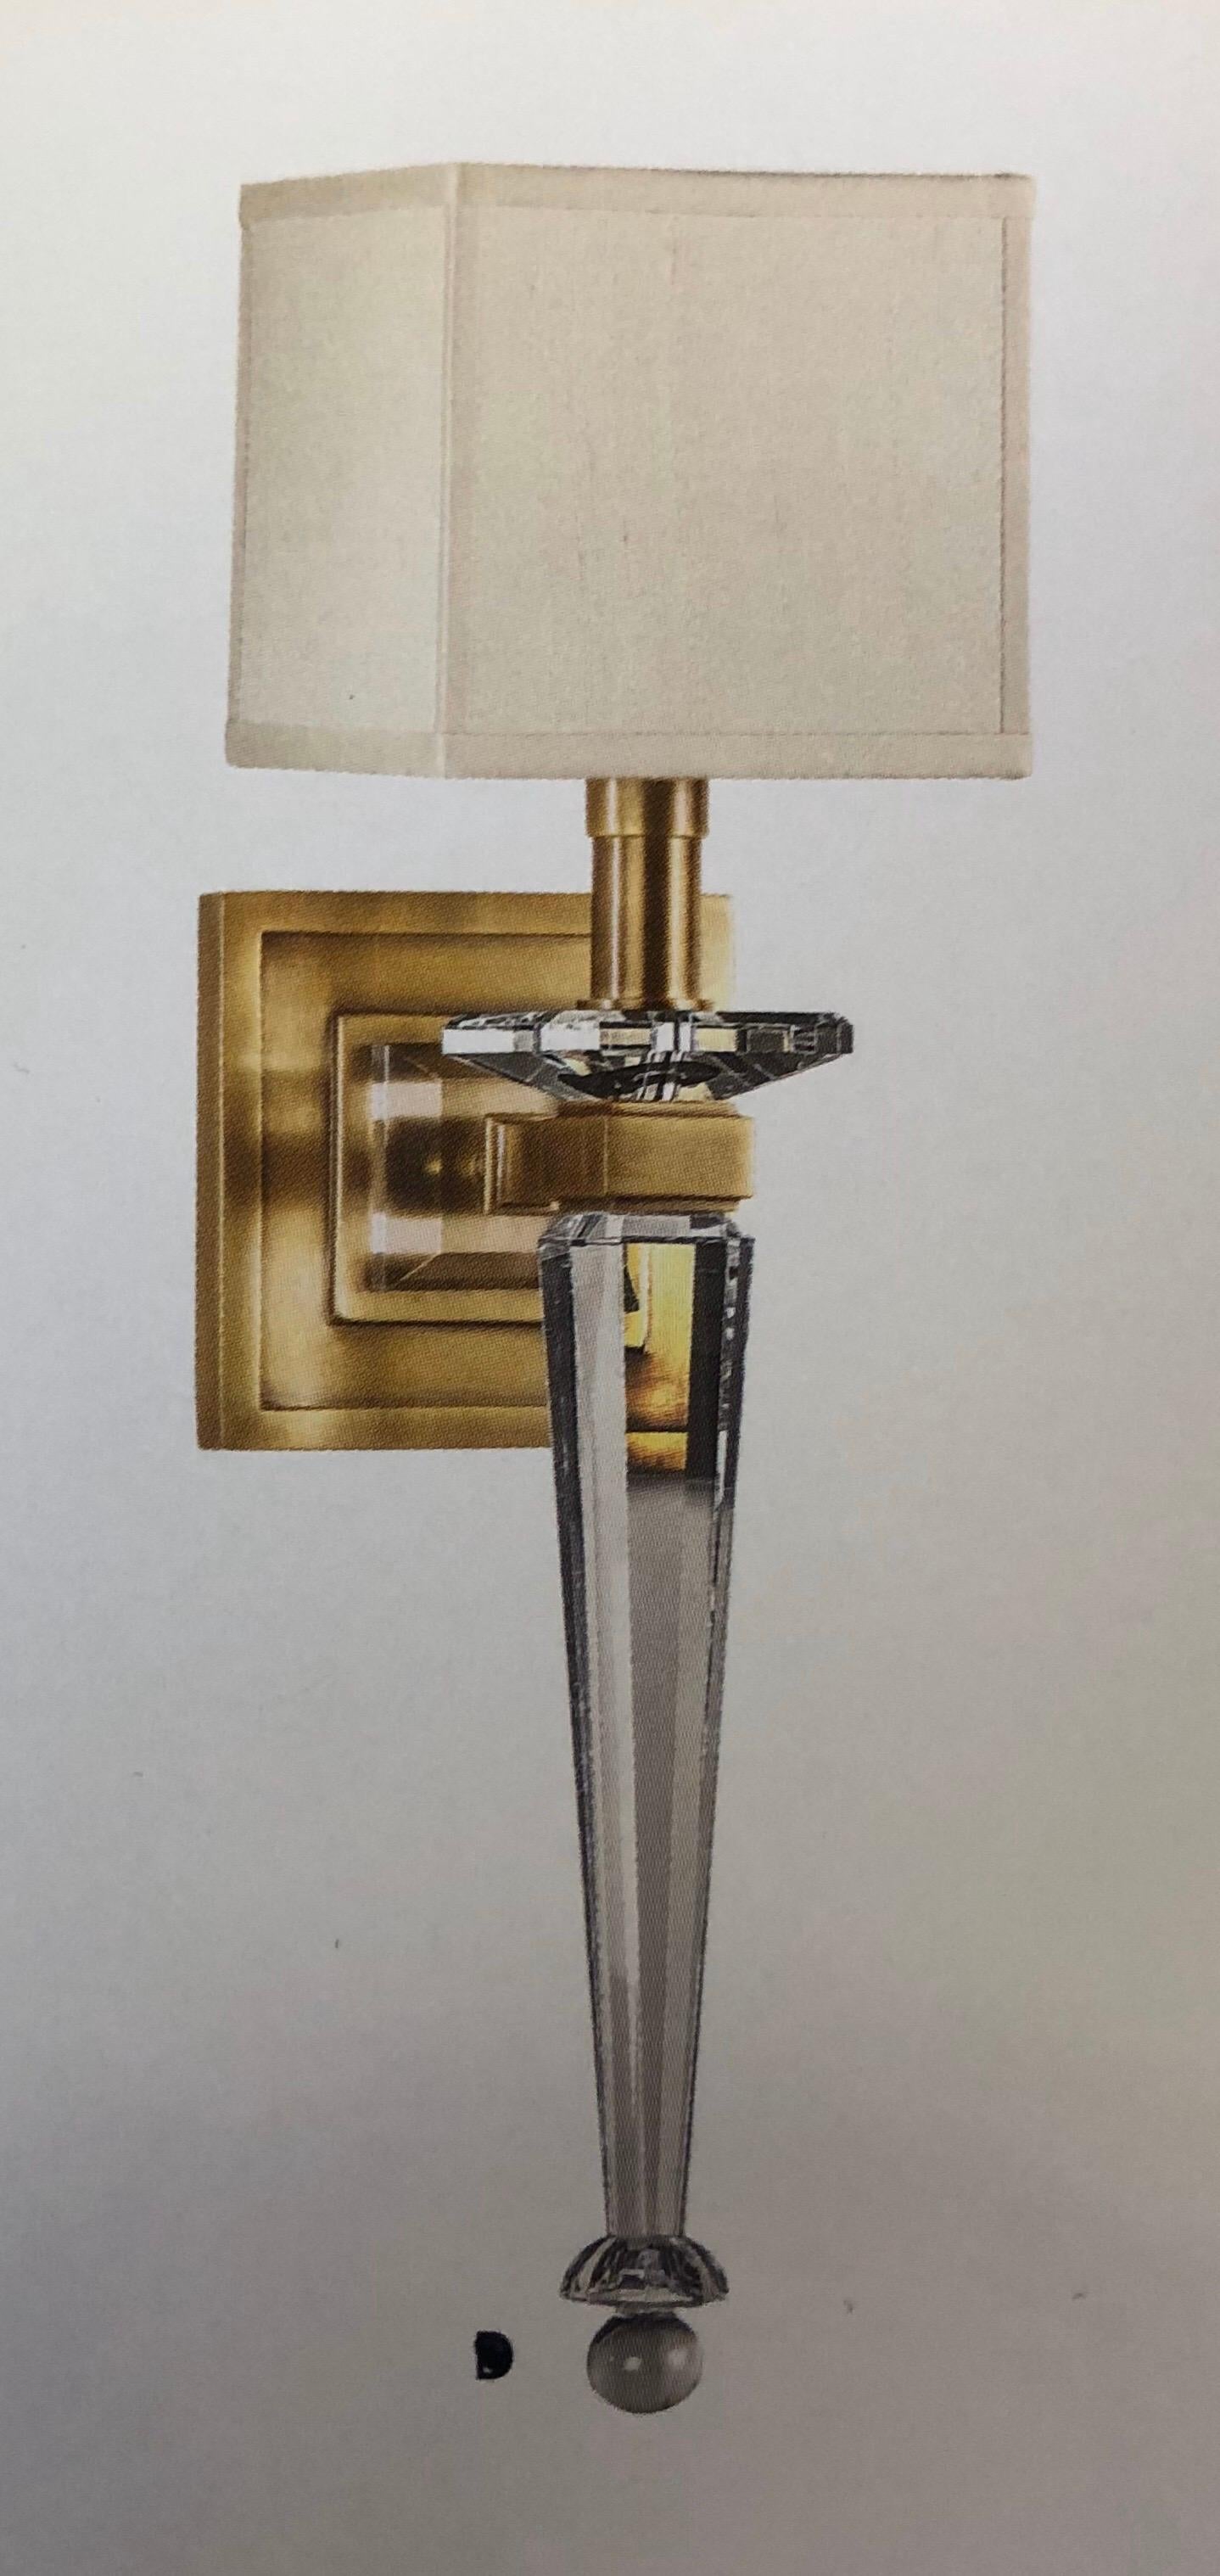 2 elegant pairs of  modern neoclassical style antiqued brass and solid crystal wall sconces / lights. 1 Light each. Hardback cotton shade is included. 

Priced and sold by the pair.